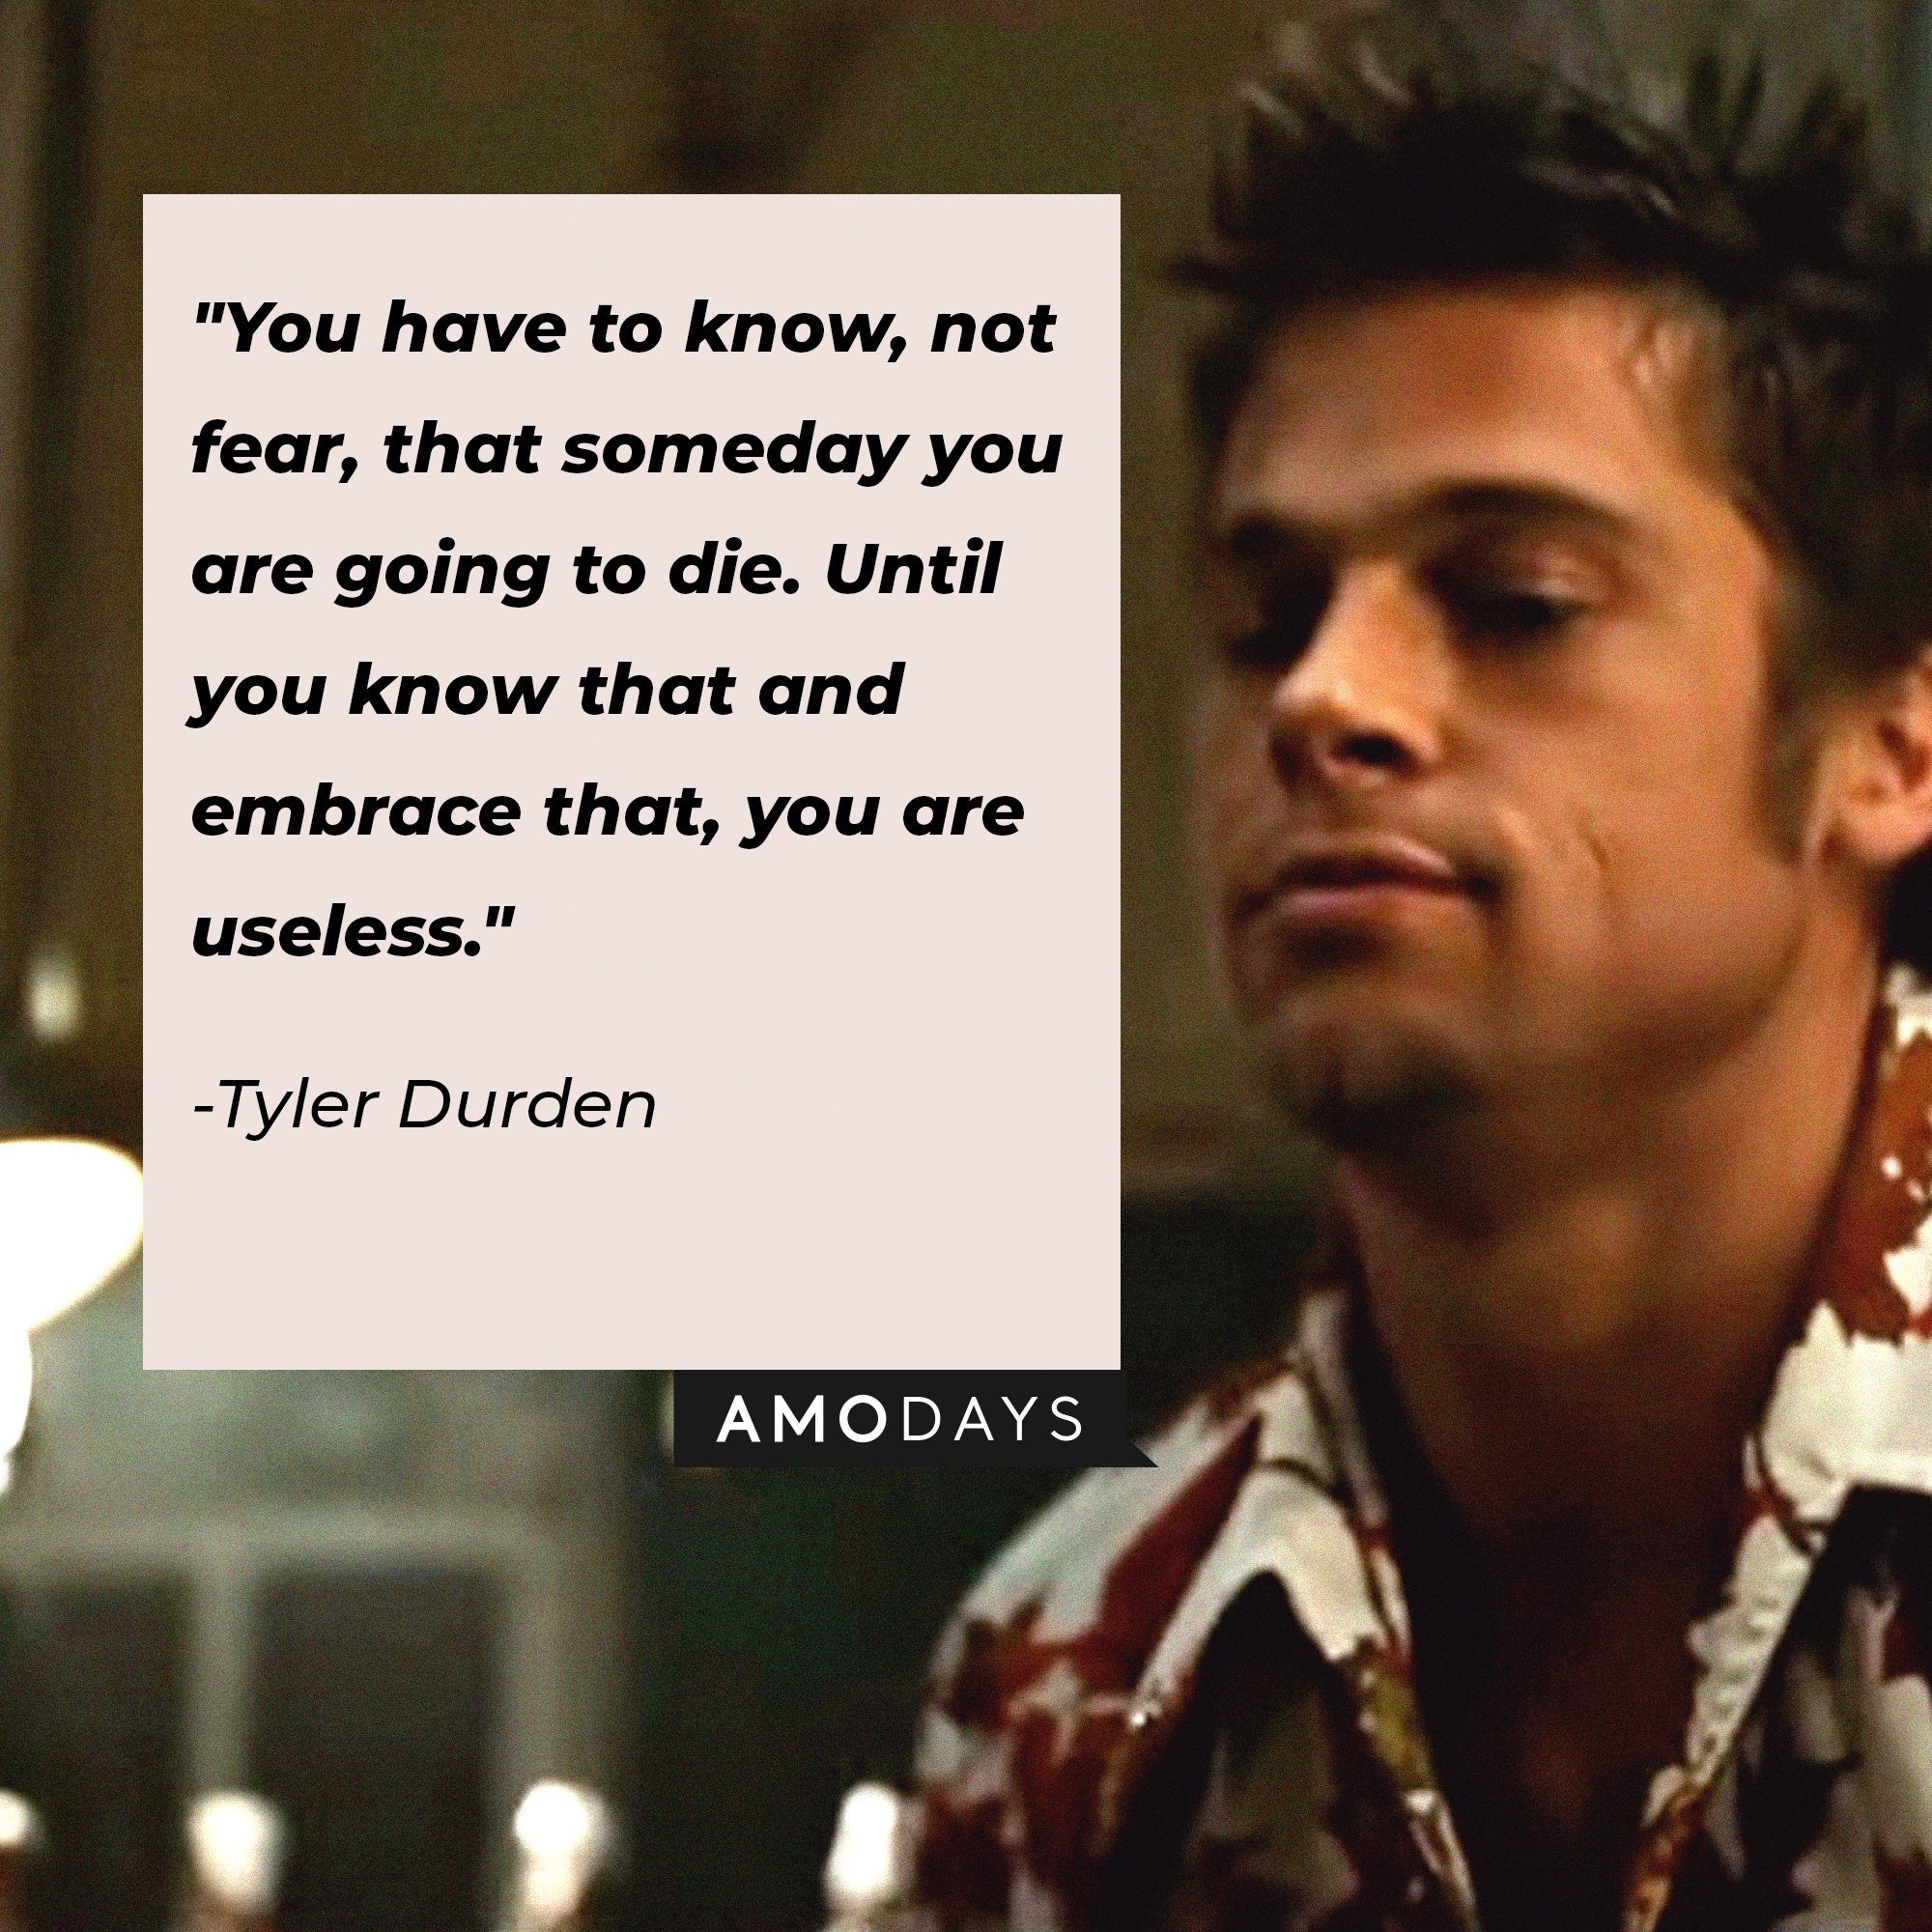  Tyler Durden’s quote: "You have to know, not fear, that someday you are going to die. Until you know that and embrace that, you are useless."  | Image: AmoDays